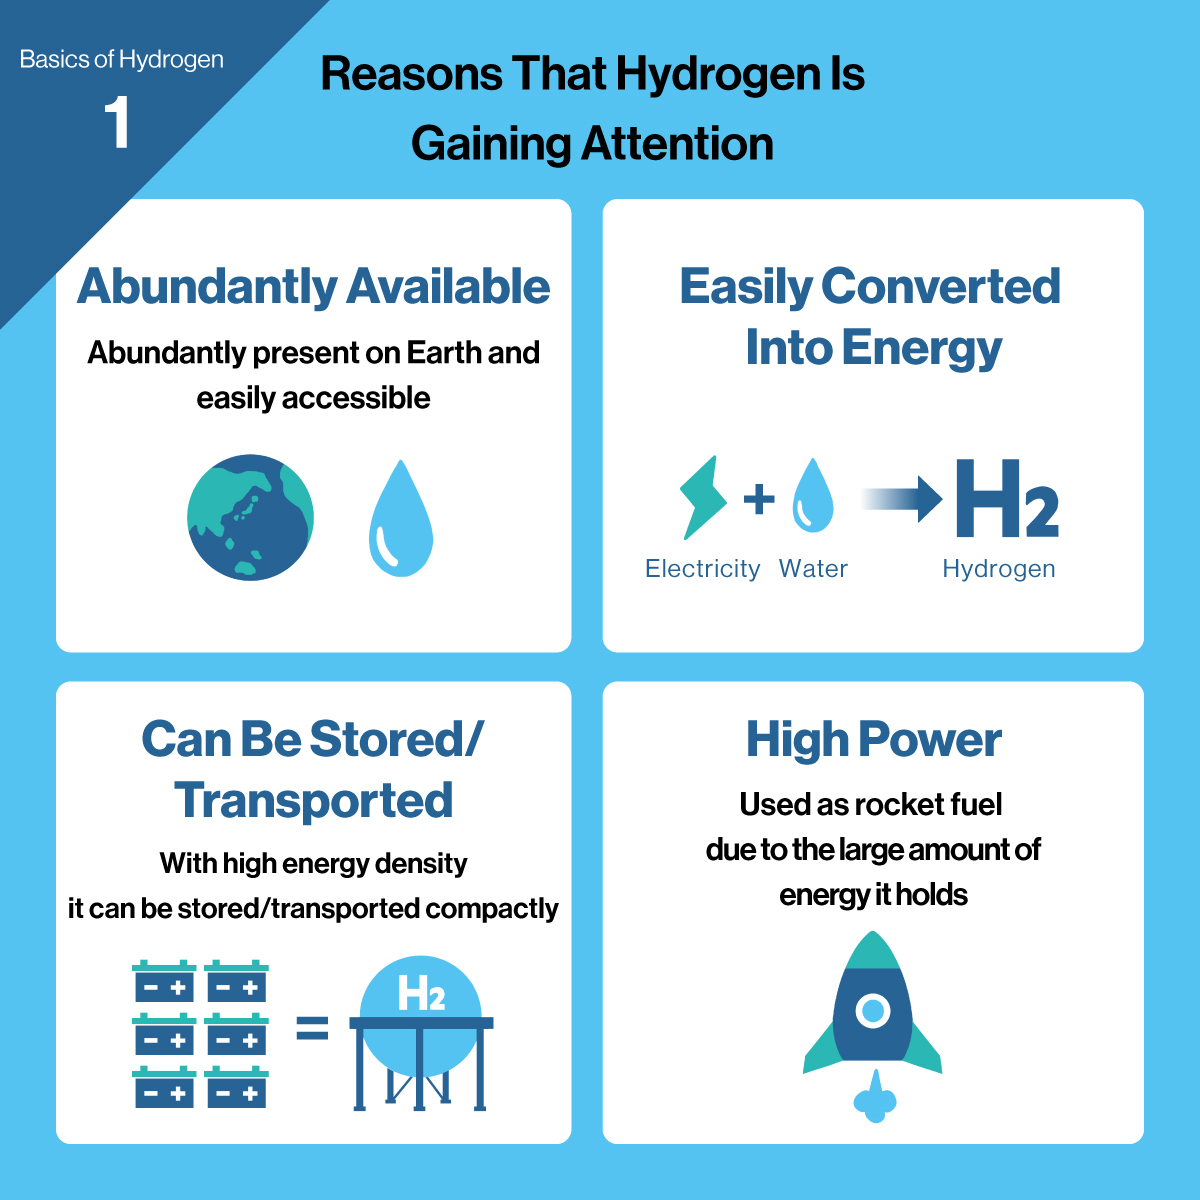 Basics of Hydrogen (1) Reasons that hydrogen is gaining attention